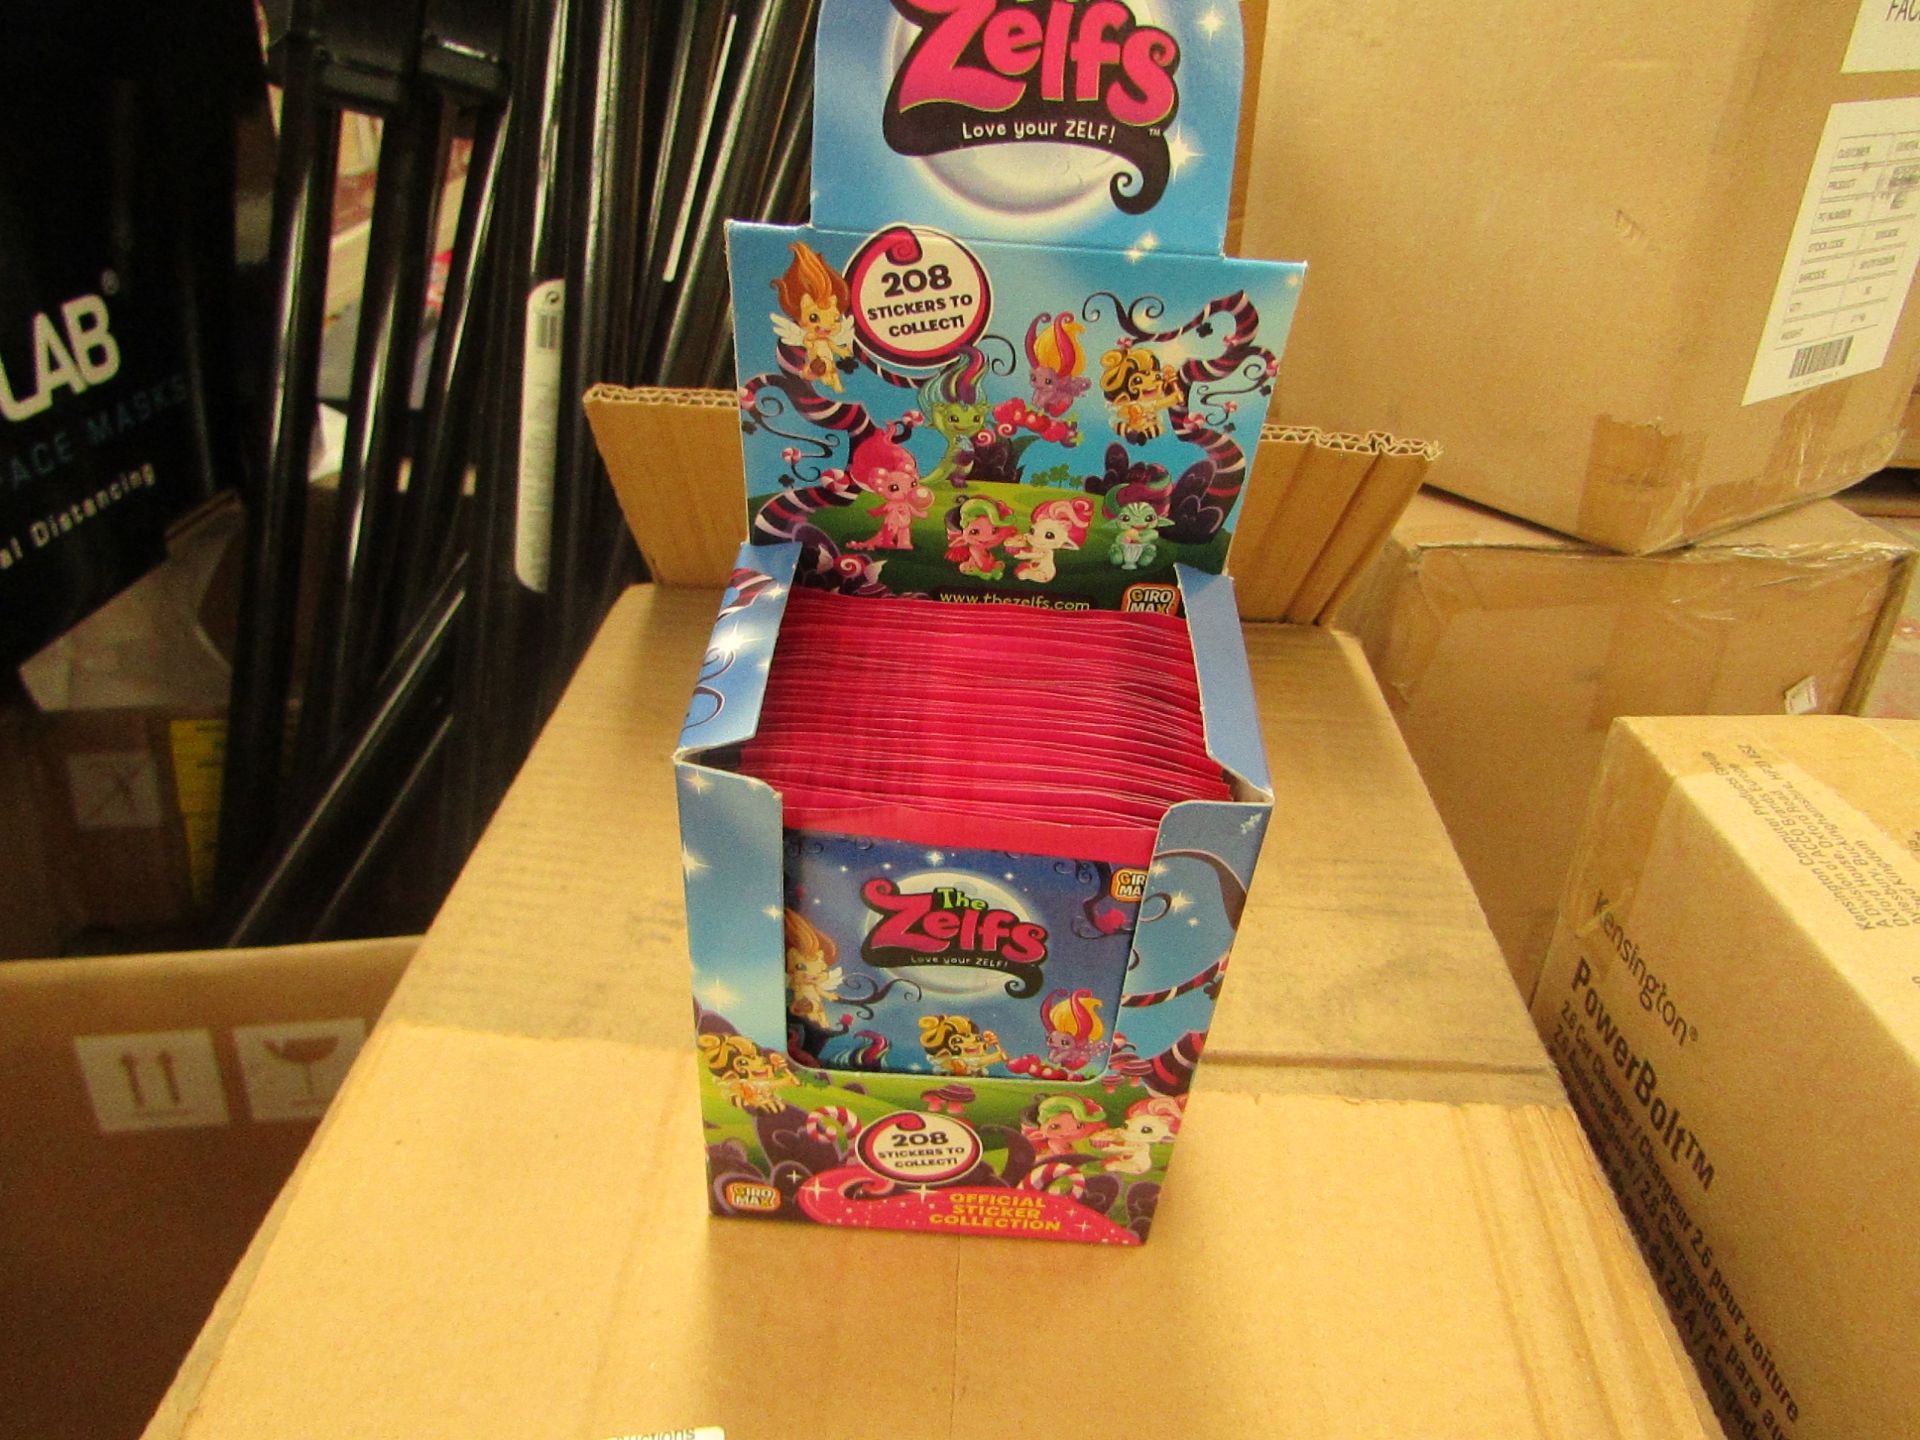 10x Boxes of Zelf Stickers, each box contains 50 packs of stickers, comes in Shop counter POS box.